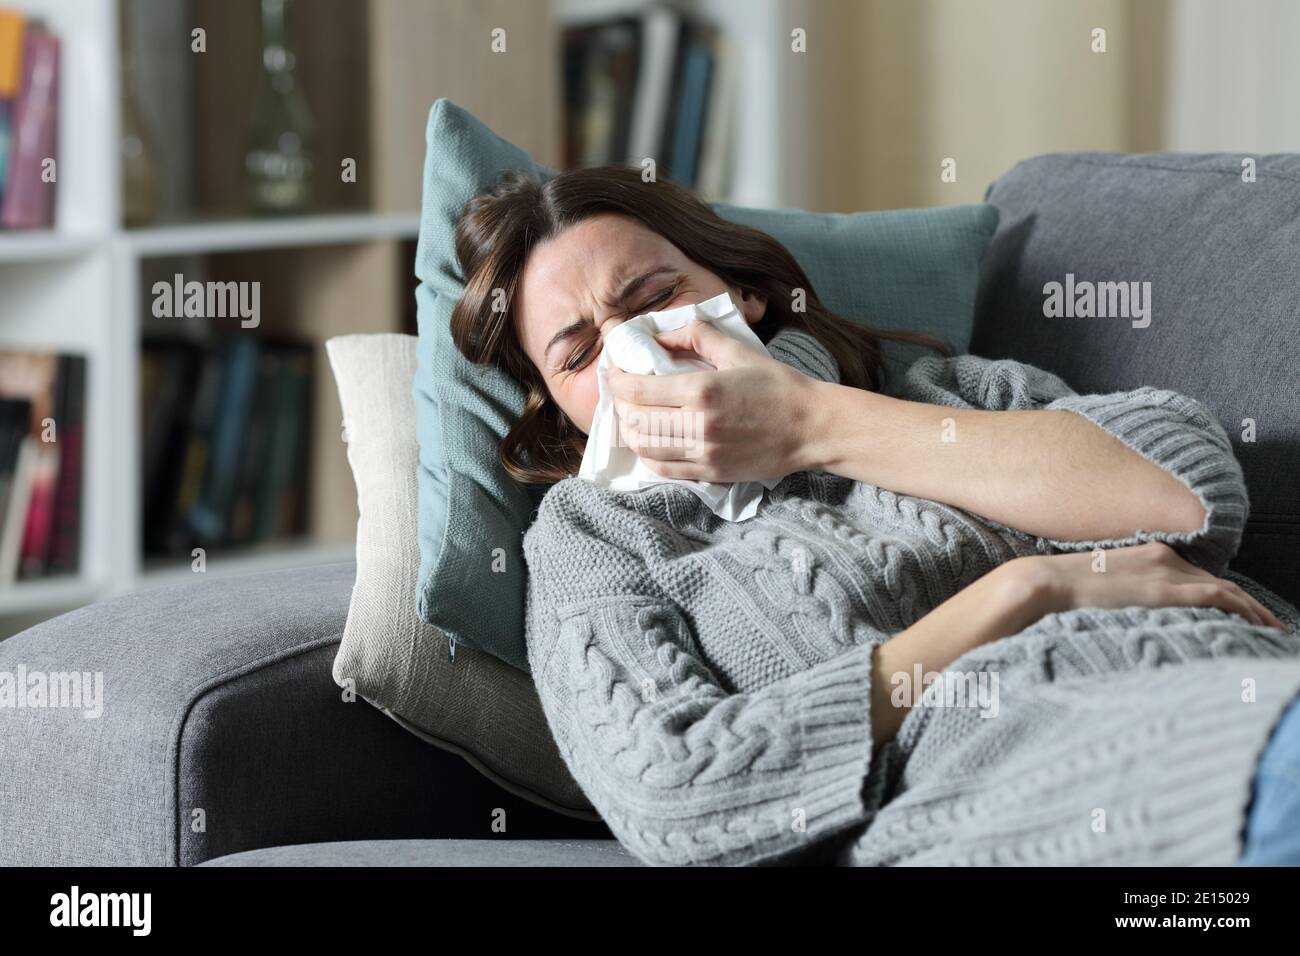 Ill woman suffering flu symptoms blowing on tissue lying on a couch at home Stock Photo